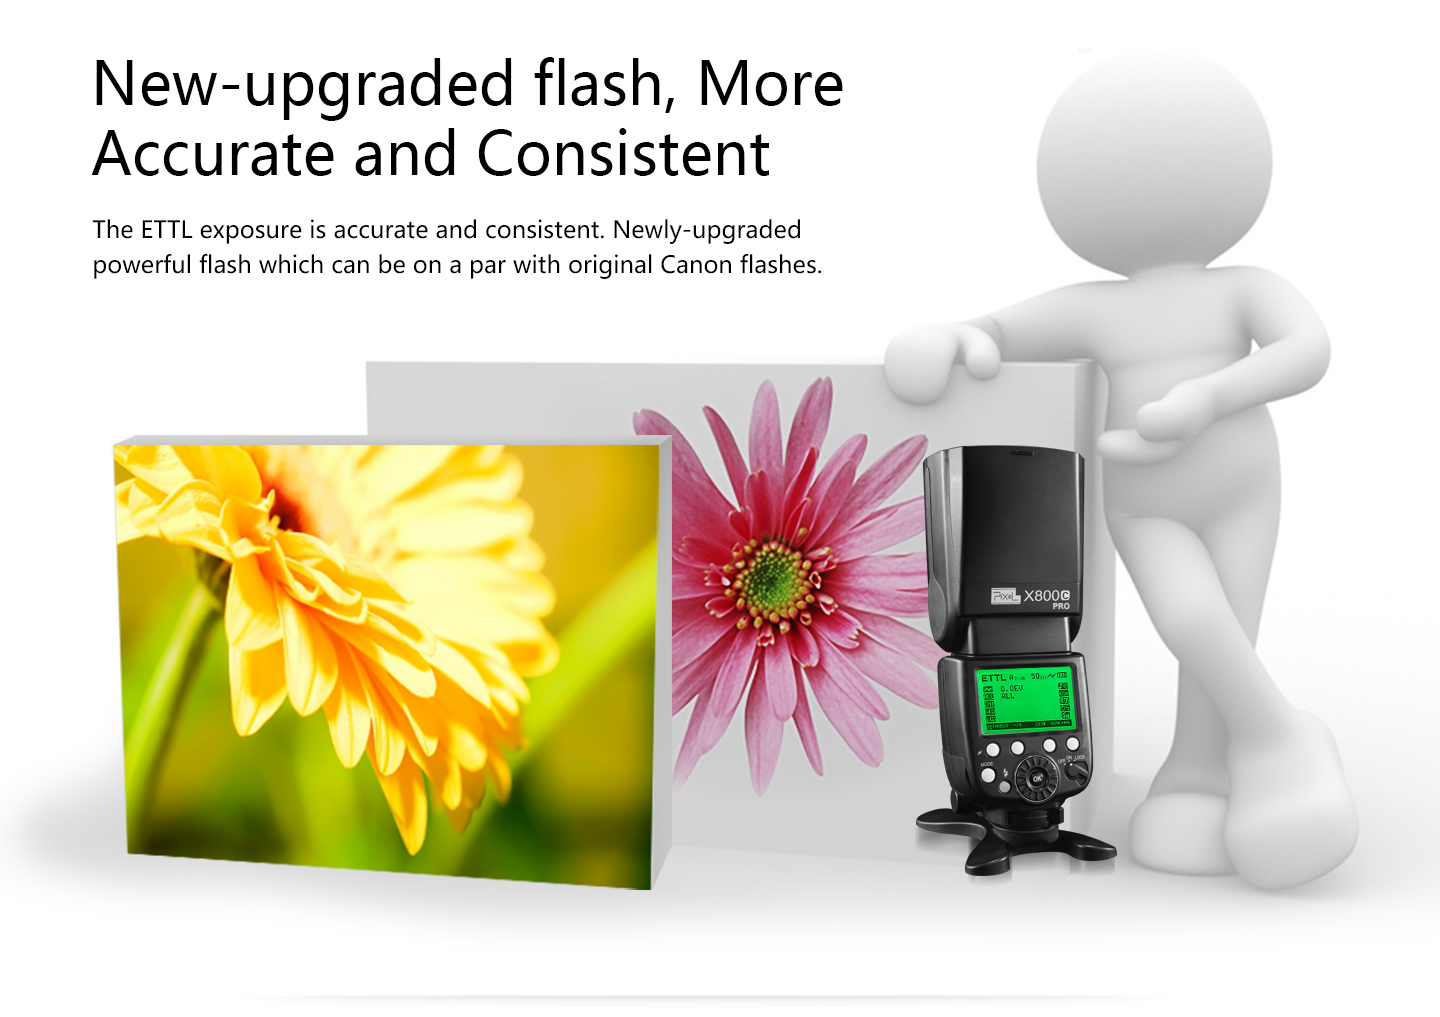 New-upgraded flash, More Accurate and Consistent